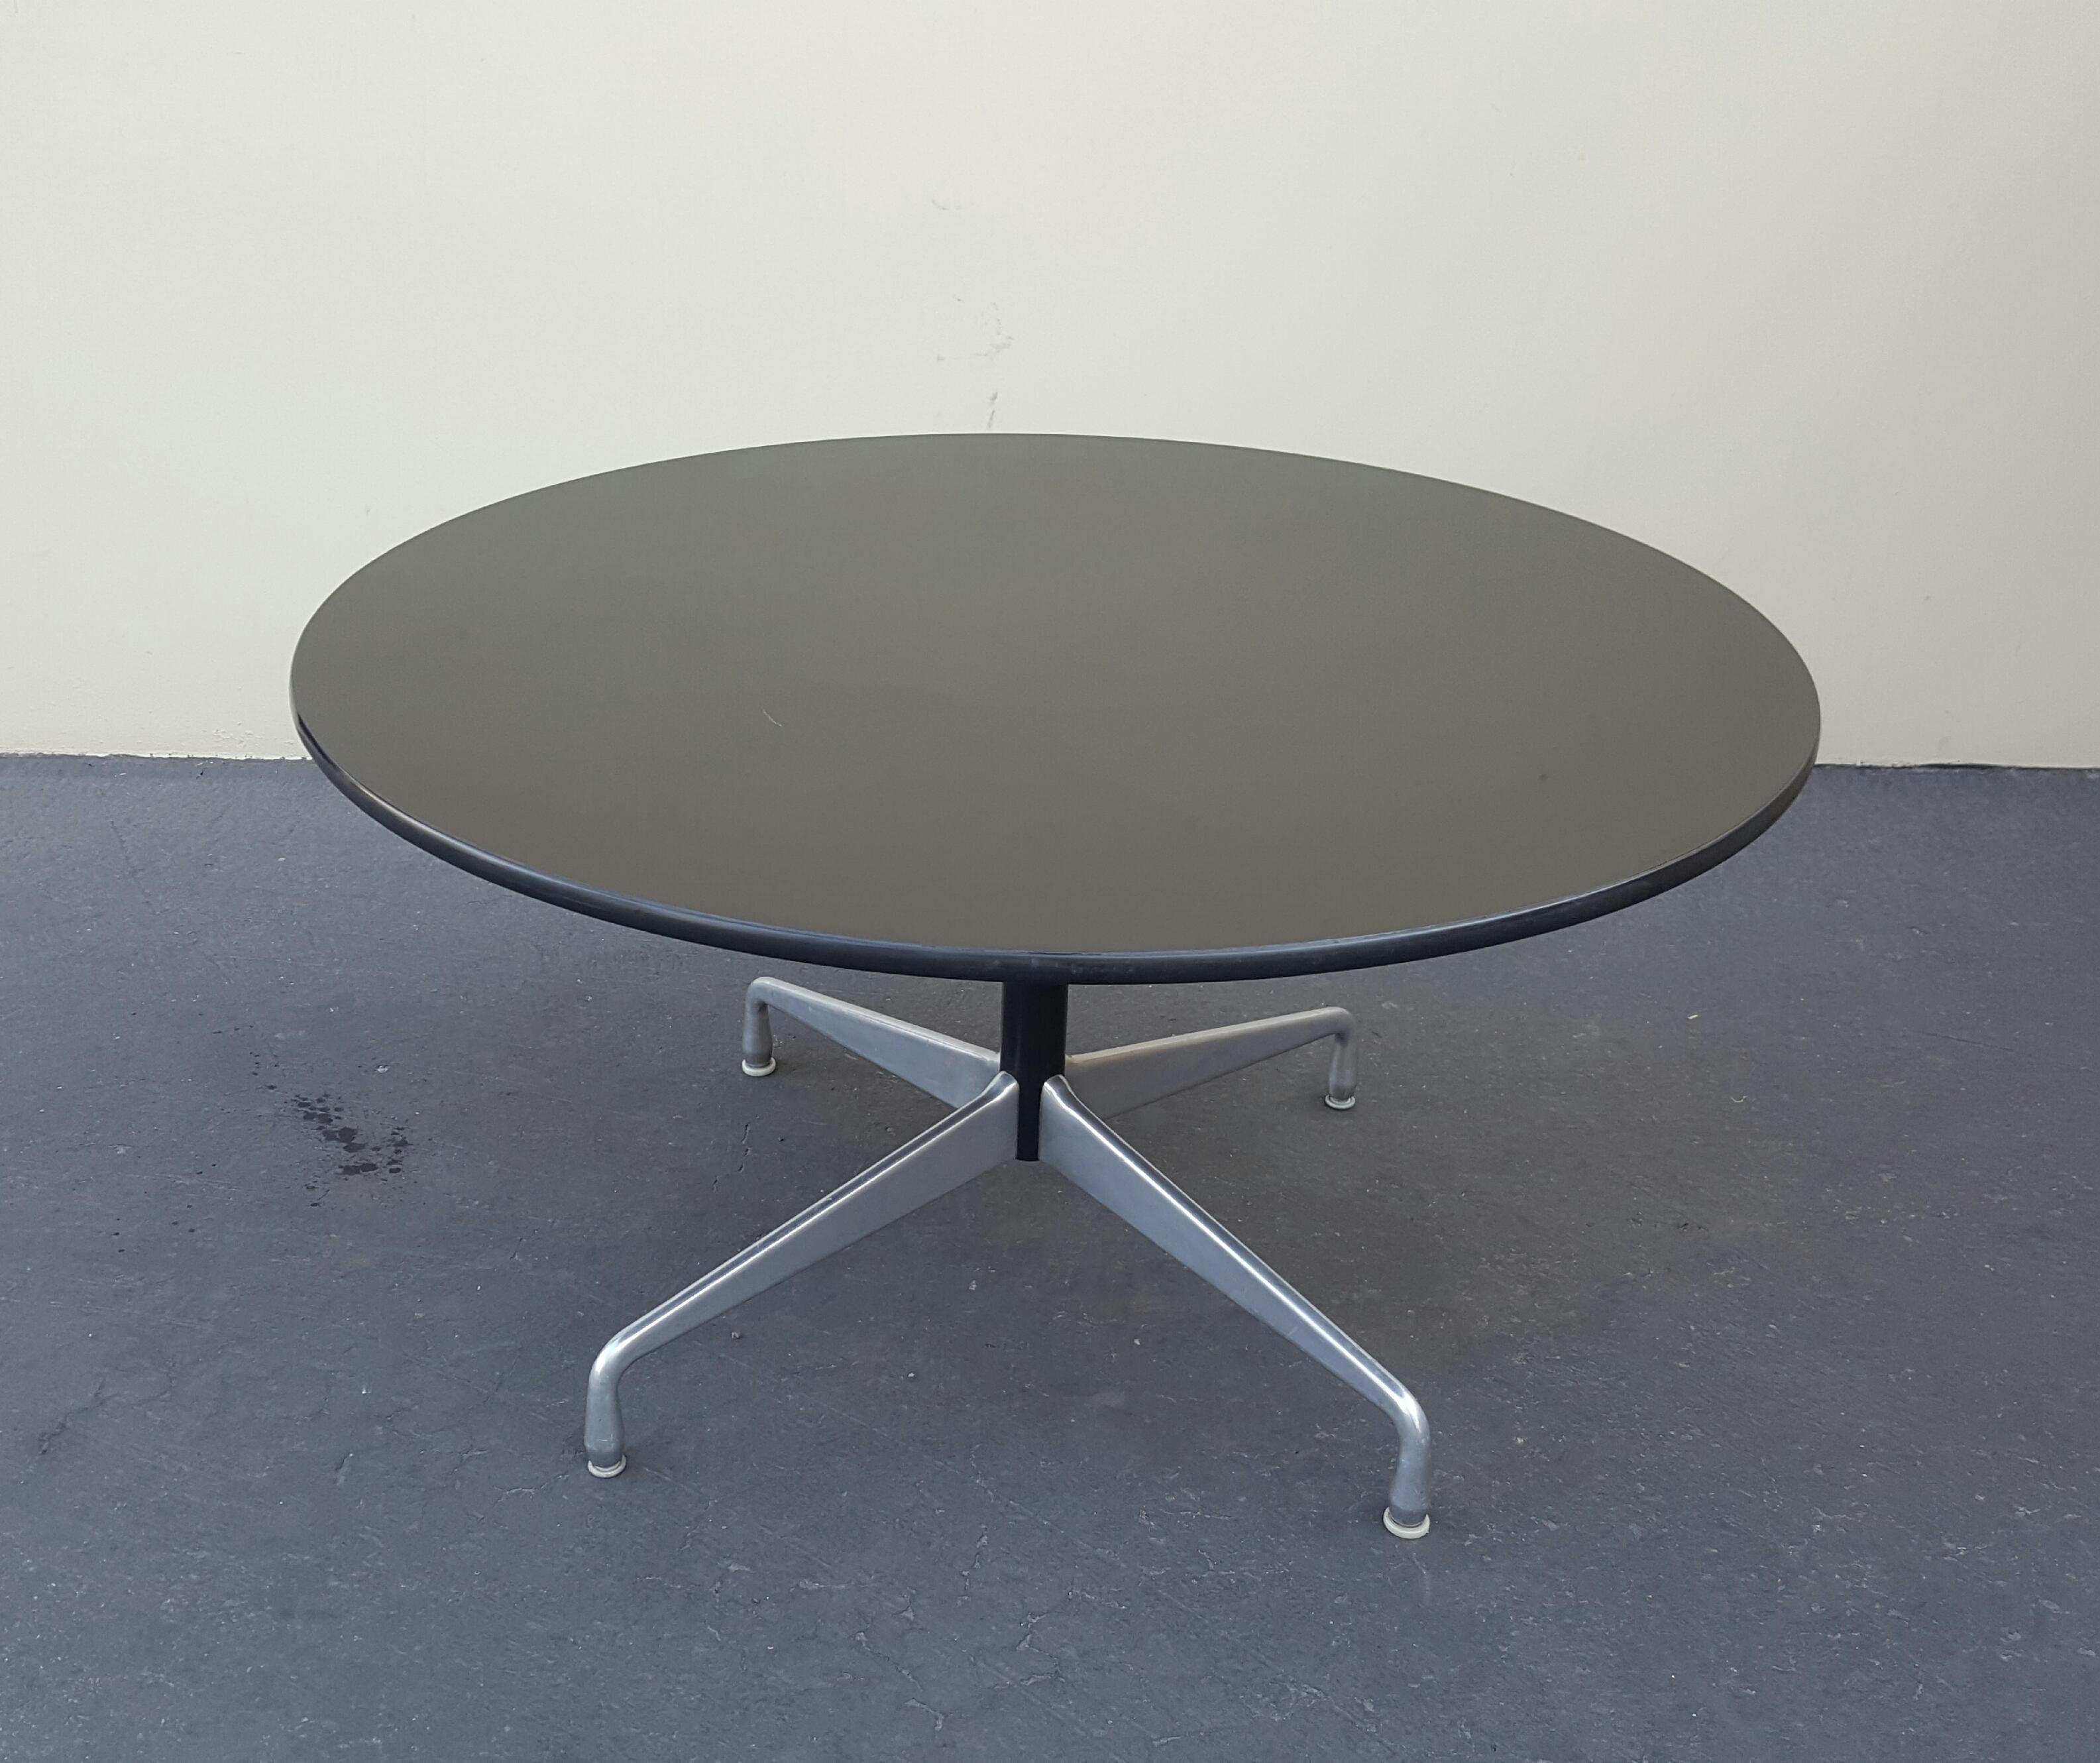 1960s Charles Eames Herman Miller Round Black Conference or Dining Table For Sale 4